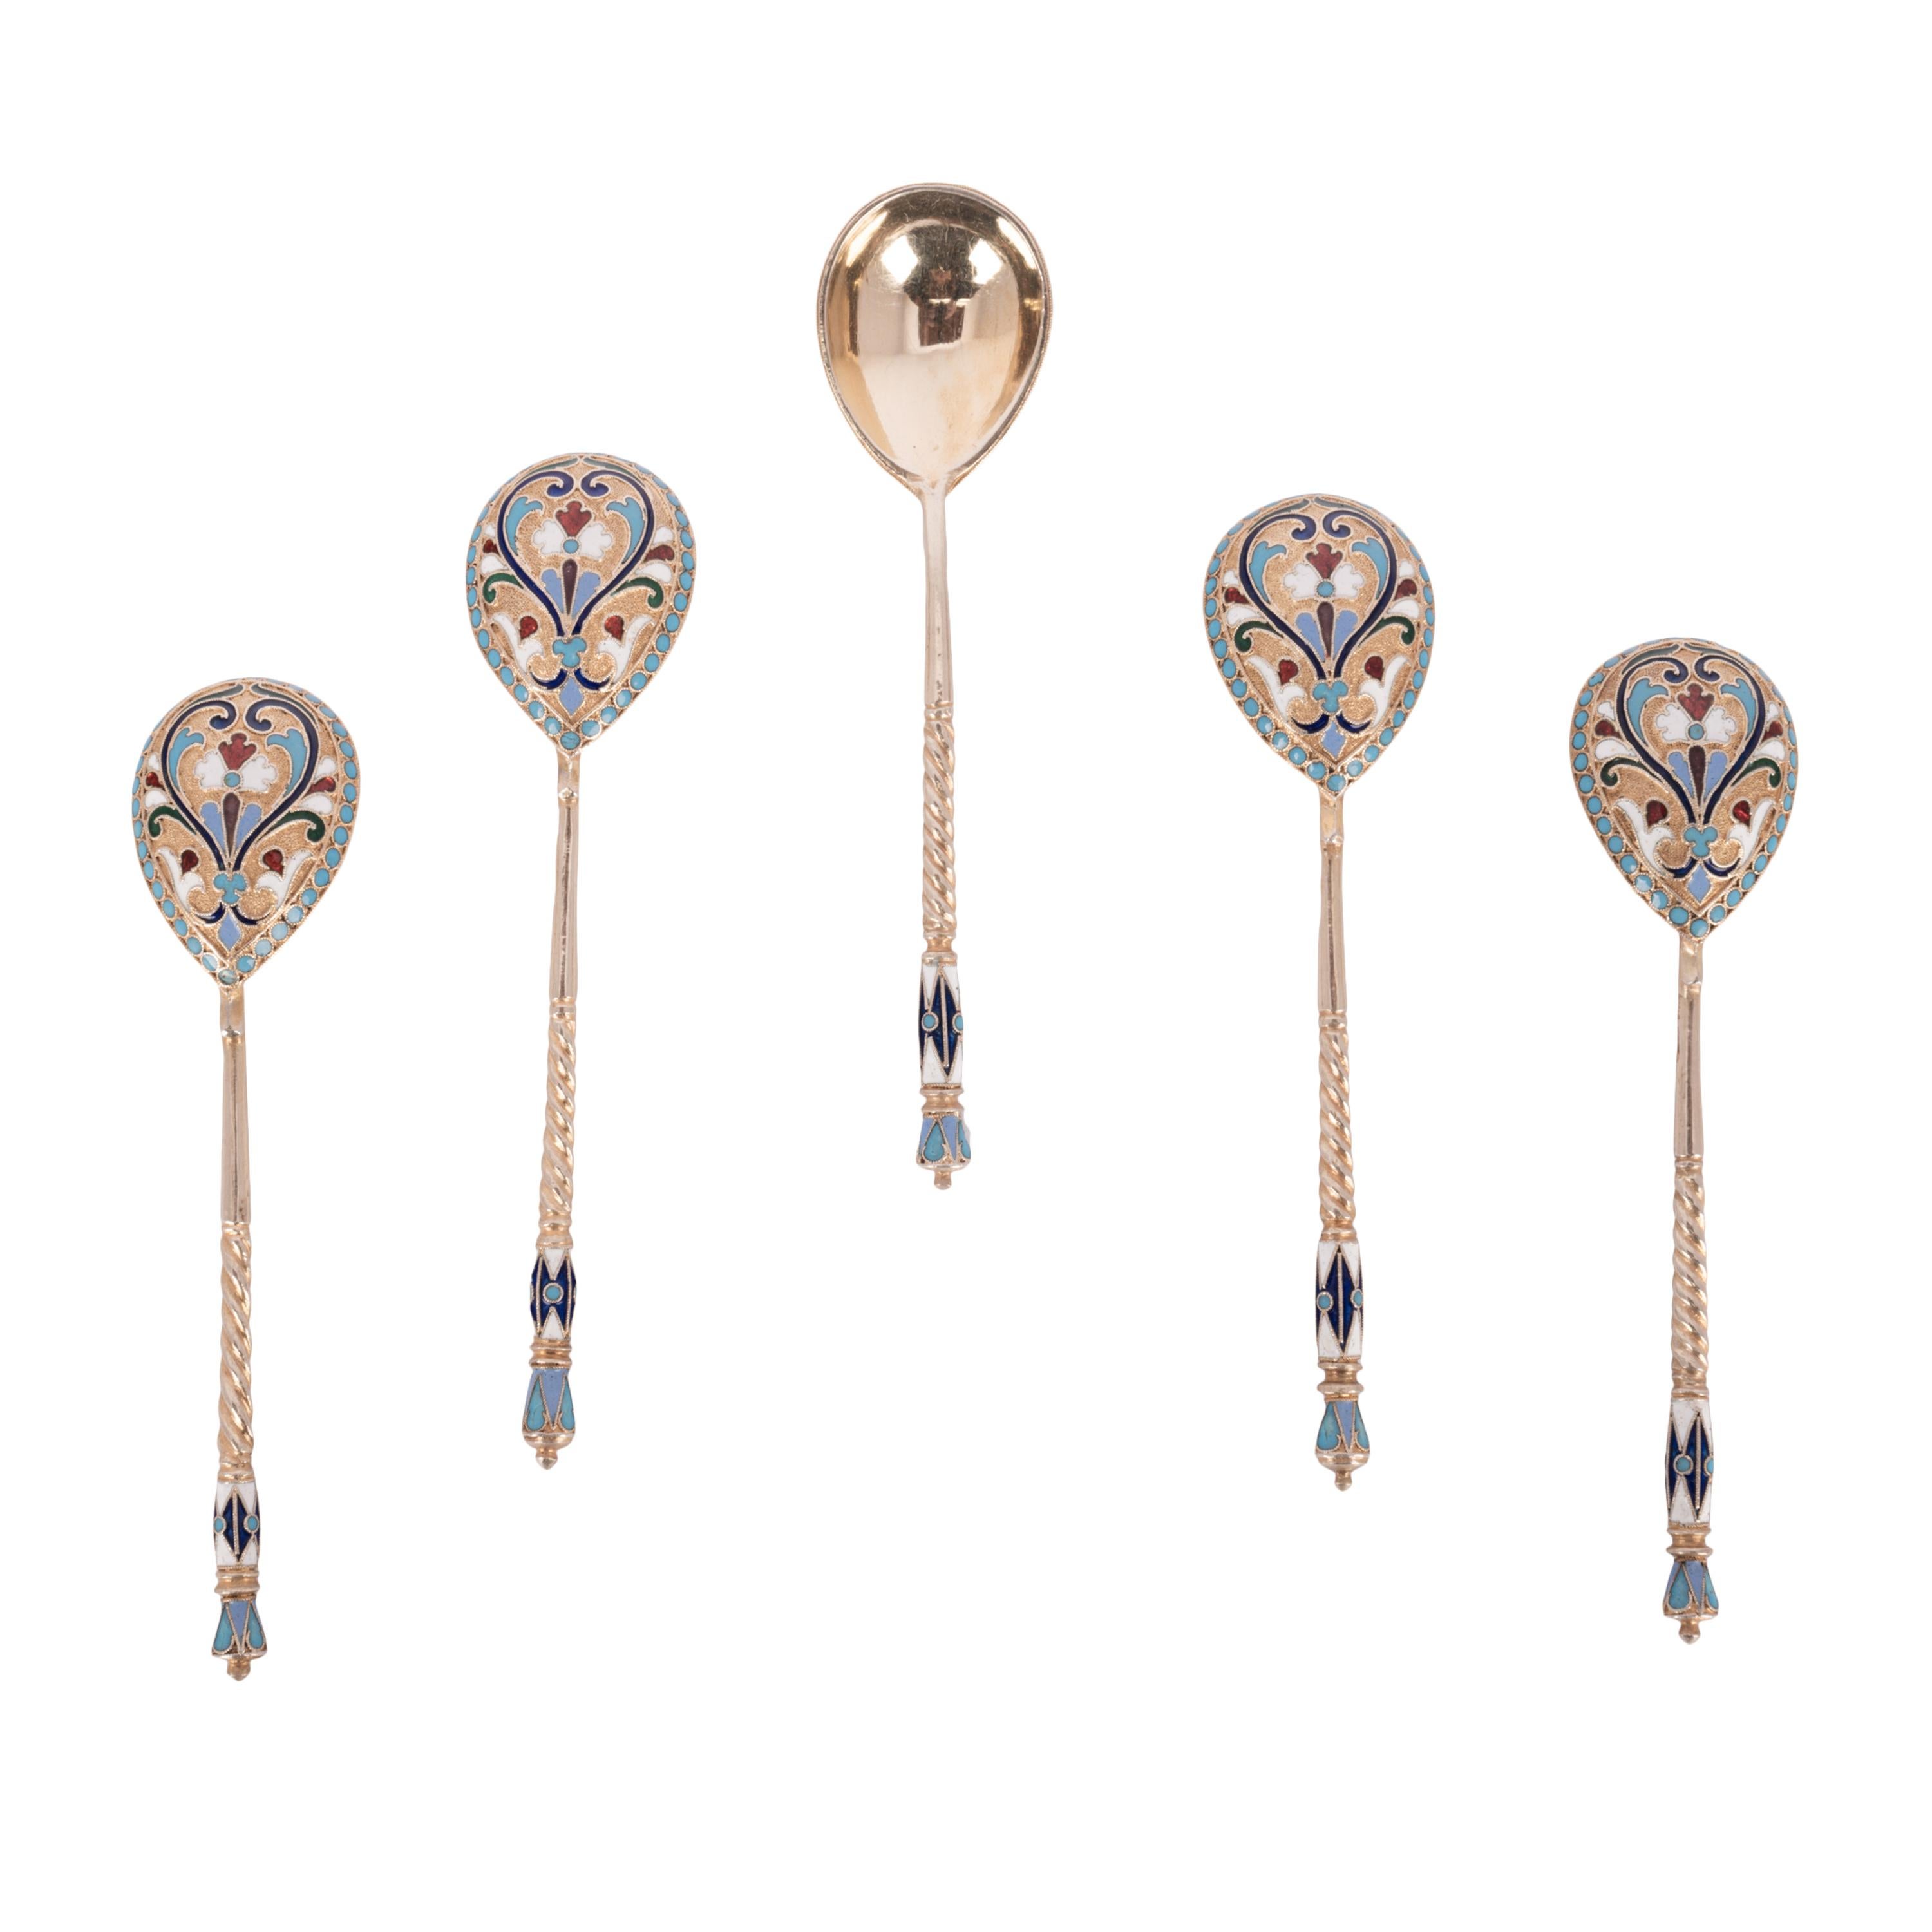 Antique Set Imperial Russian Silver Gilt Cloisonne Spoons Feodosii Pekin Moscow In Good Condition For Sale In Portland, OR